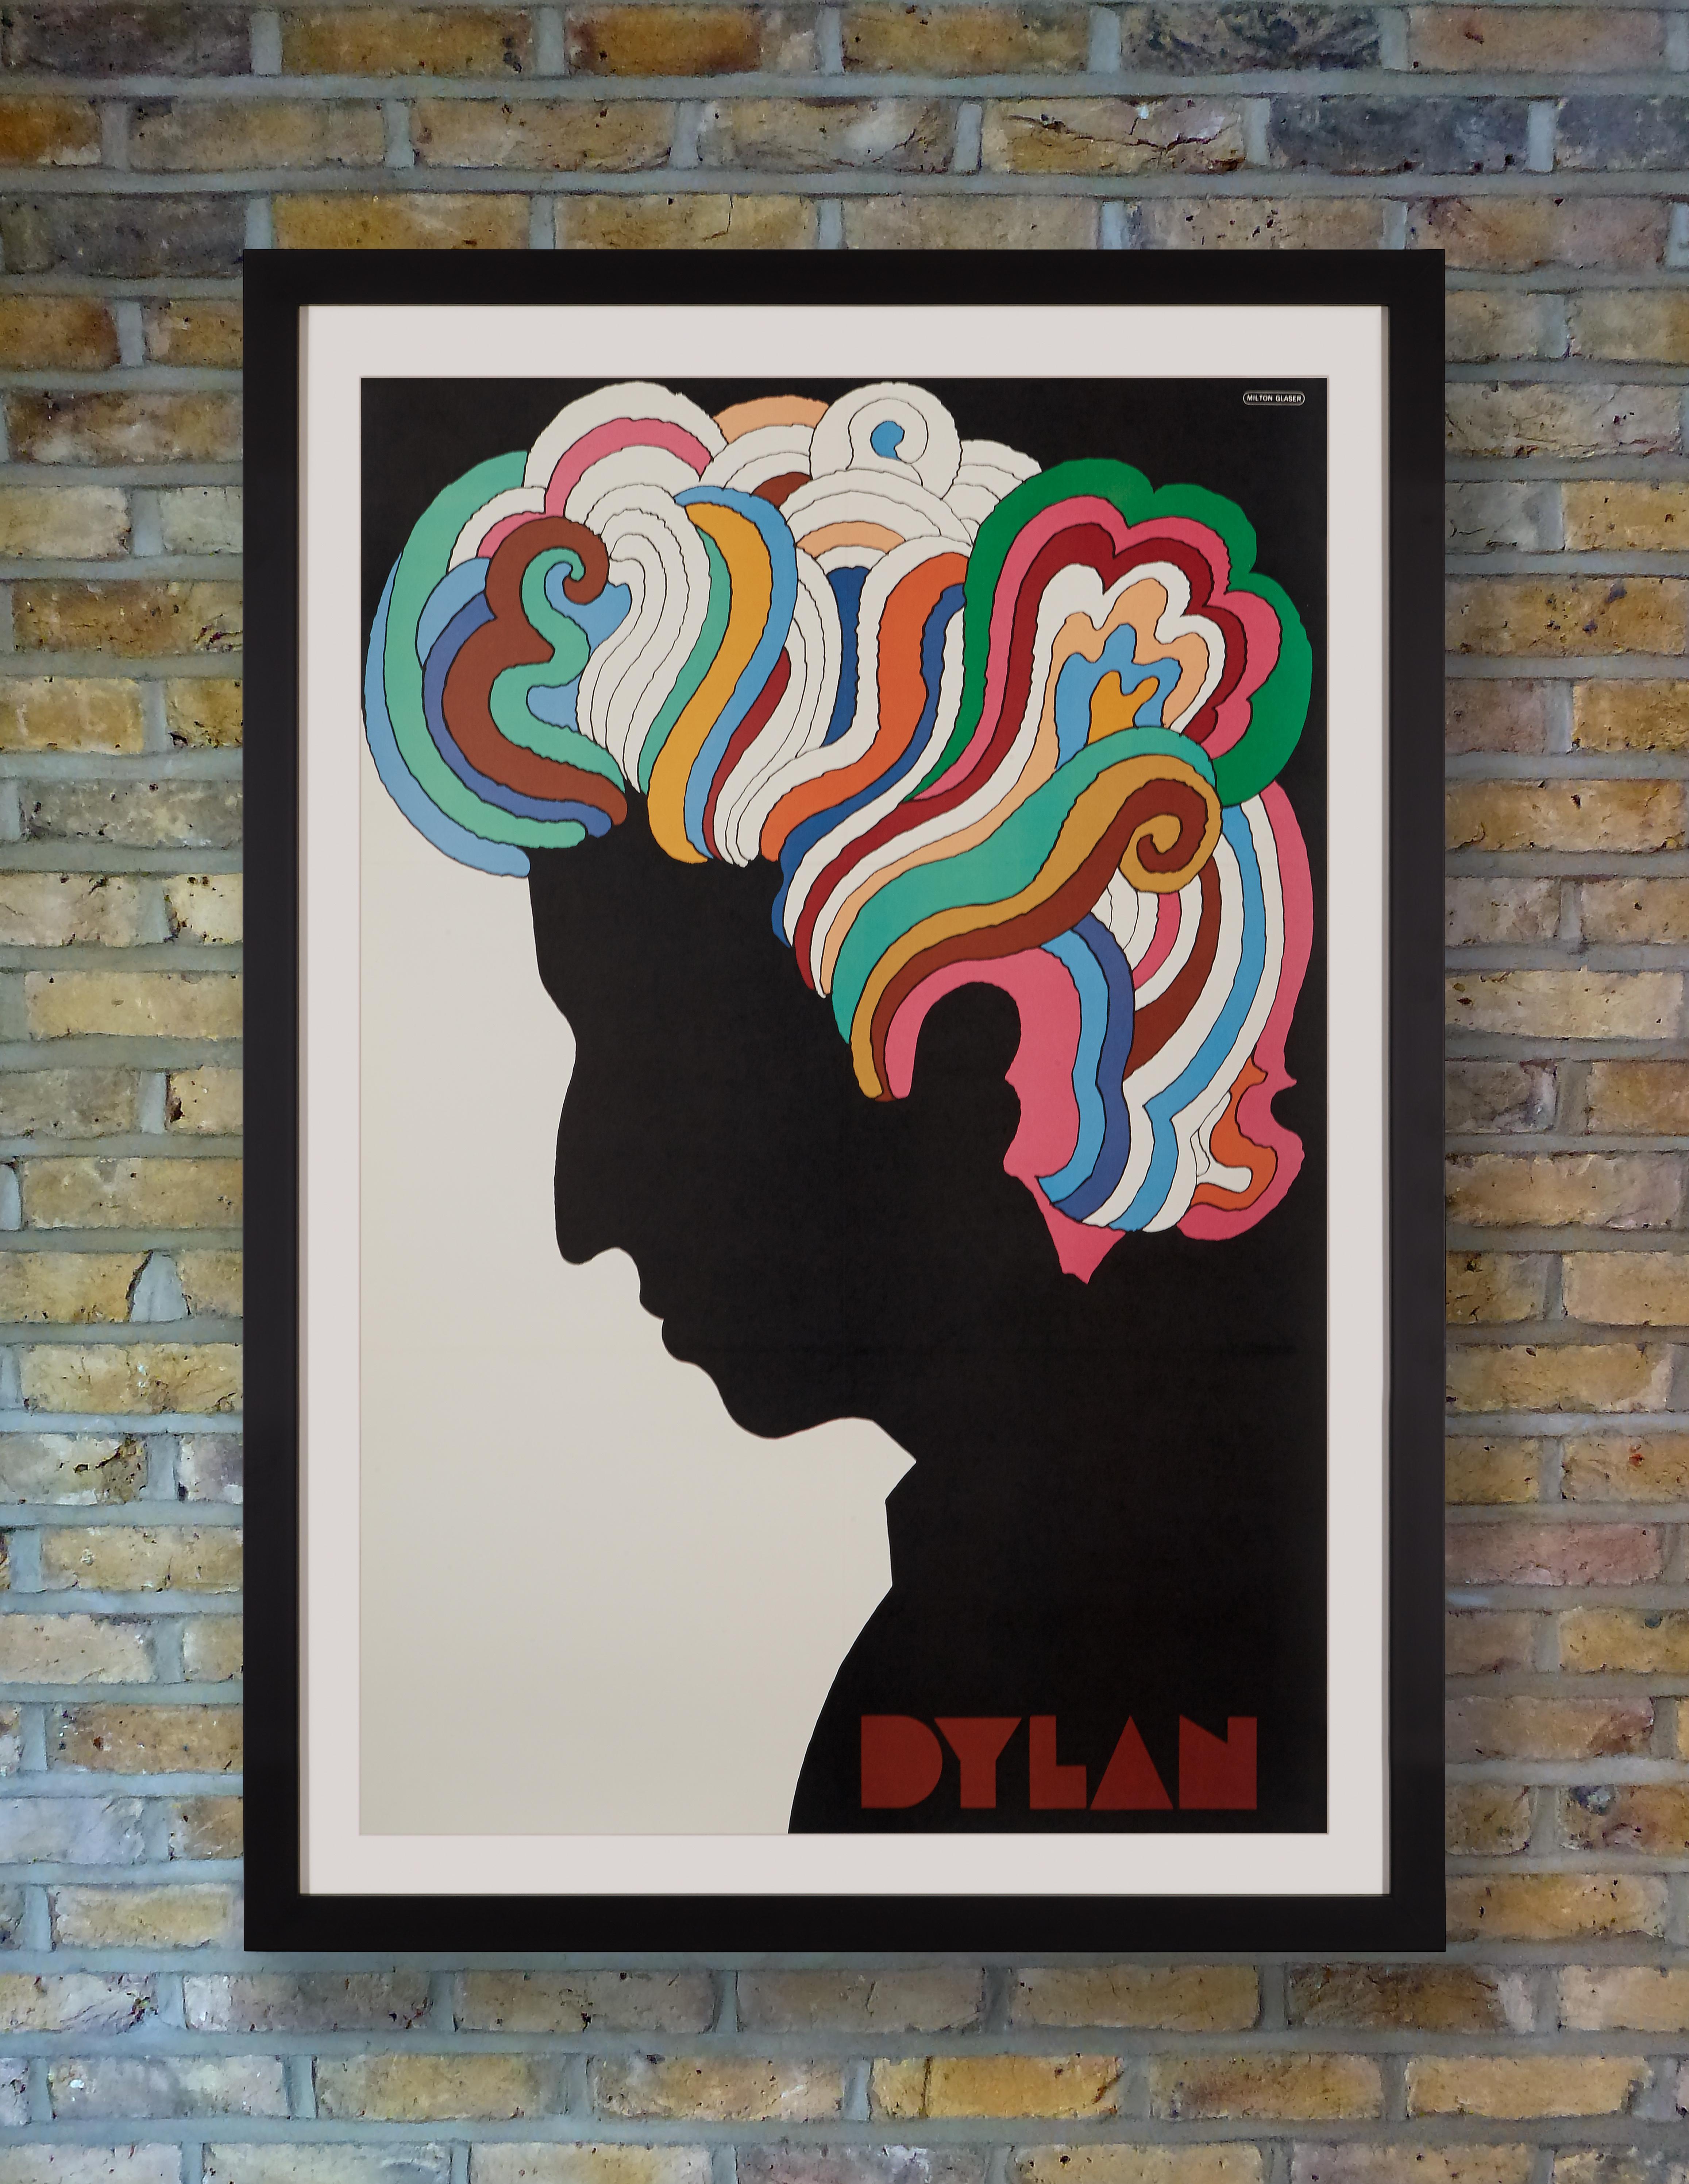 Bob Dylan's greatest hits
US Souvenir poster
Backed on linen
Art by Milton Glaser

One of America's most celebrated graphic designers and creator of the I ? NY logo, Milton Glaser was commissioned by Columbia Records to design a bonus insert